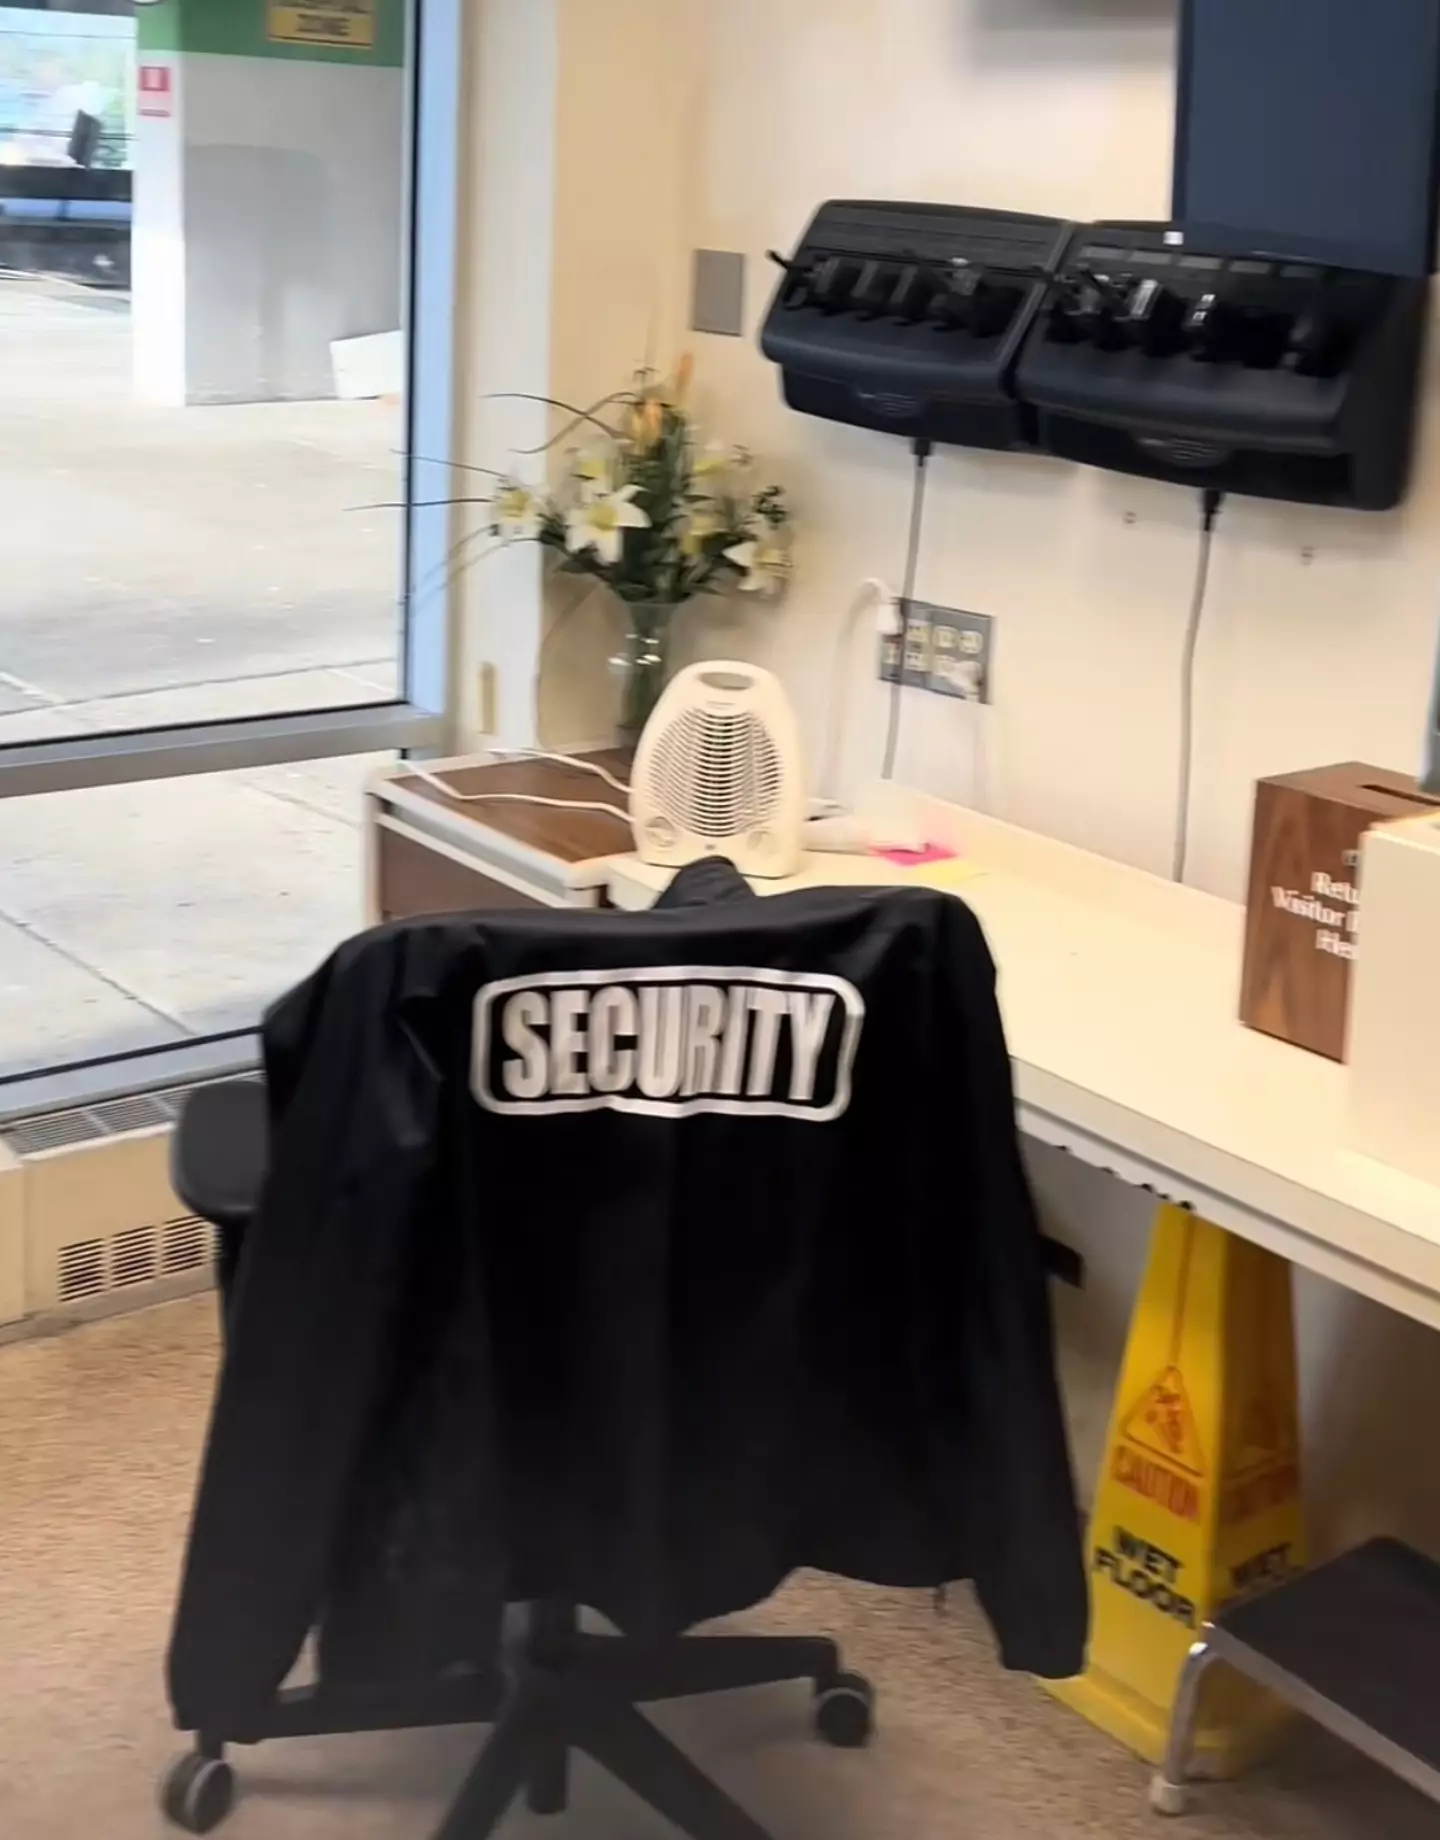 The security jackets were left draped on the back of spinny chairs